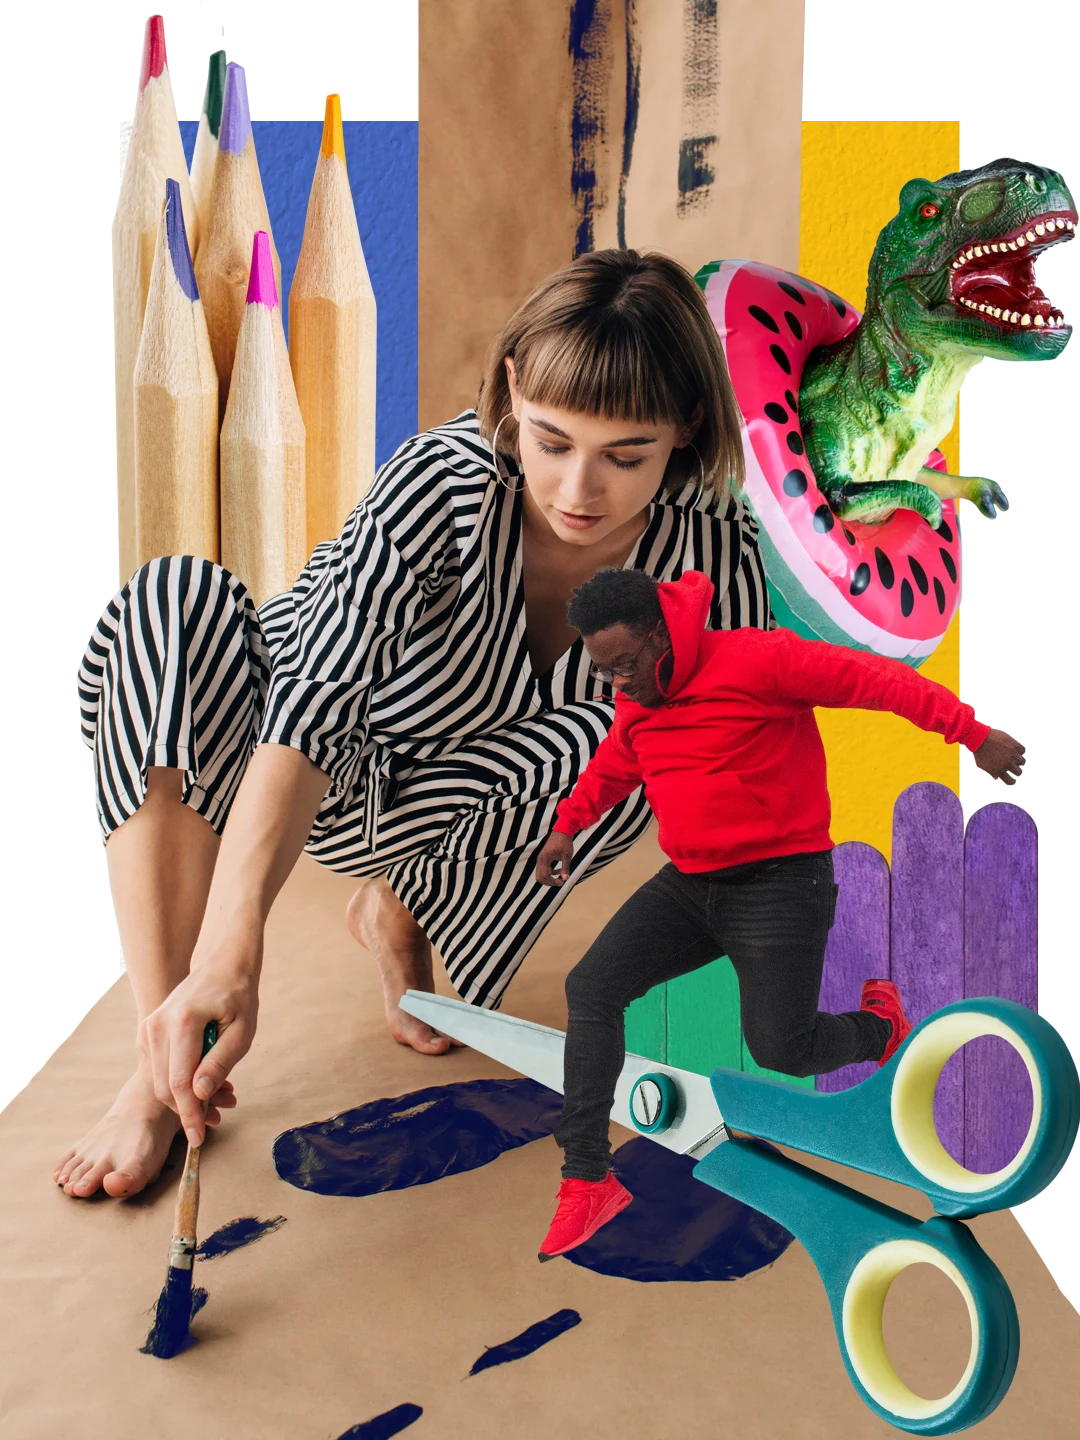 Collage of crafting. A toy T-Rex with a watermelon floater. In the center, a white woman painting on the floor. On the right, a Black man jumping over a pair of scissors. Large colored pencils, scissors, contact paper.
